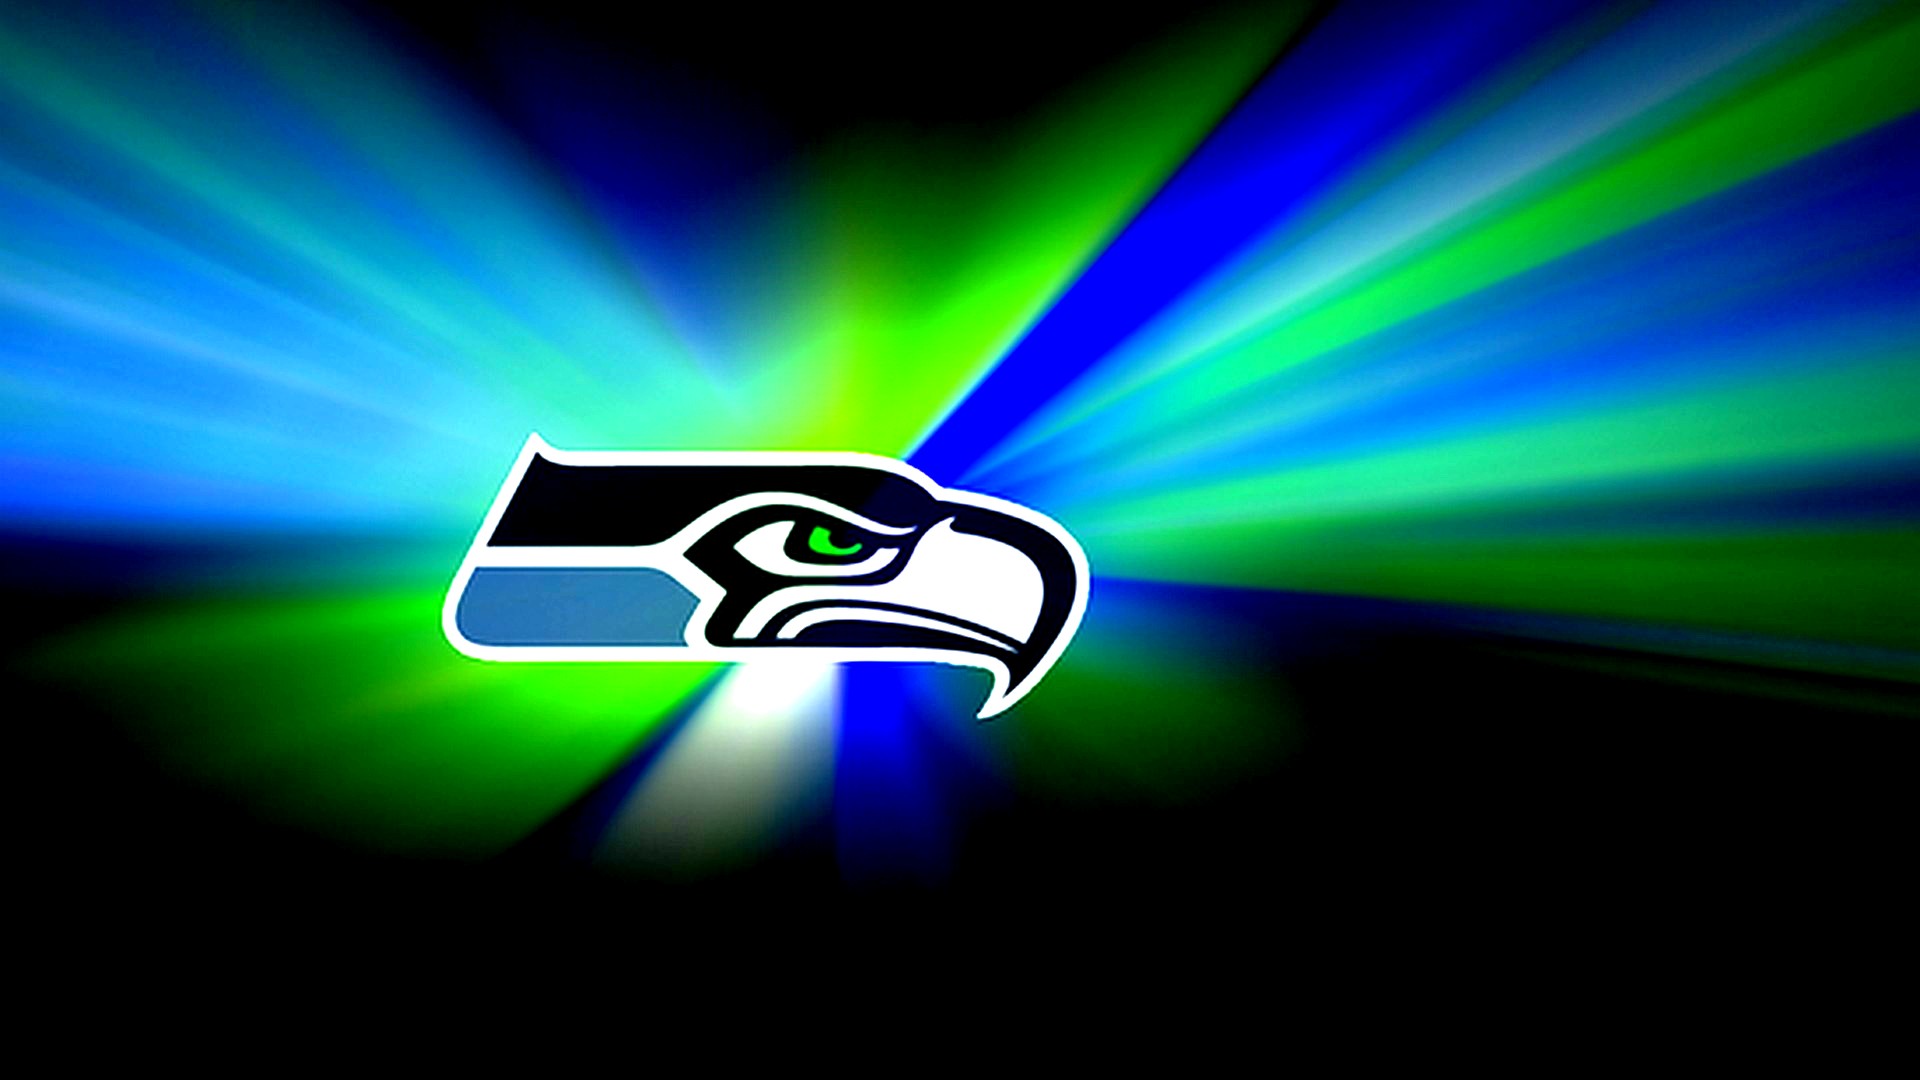 Seattle Seahawks Wallpaper For Mac OS With high-resolution 1920X1080 pixel. Download and set as wallpaper for Desktop Computer, Apple iPhone X, XS Max, XR, 8, 7, 6, SE, iPad, Android